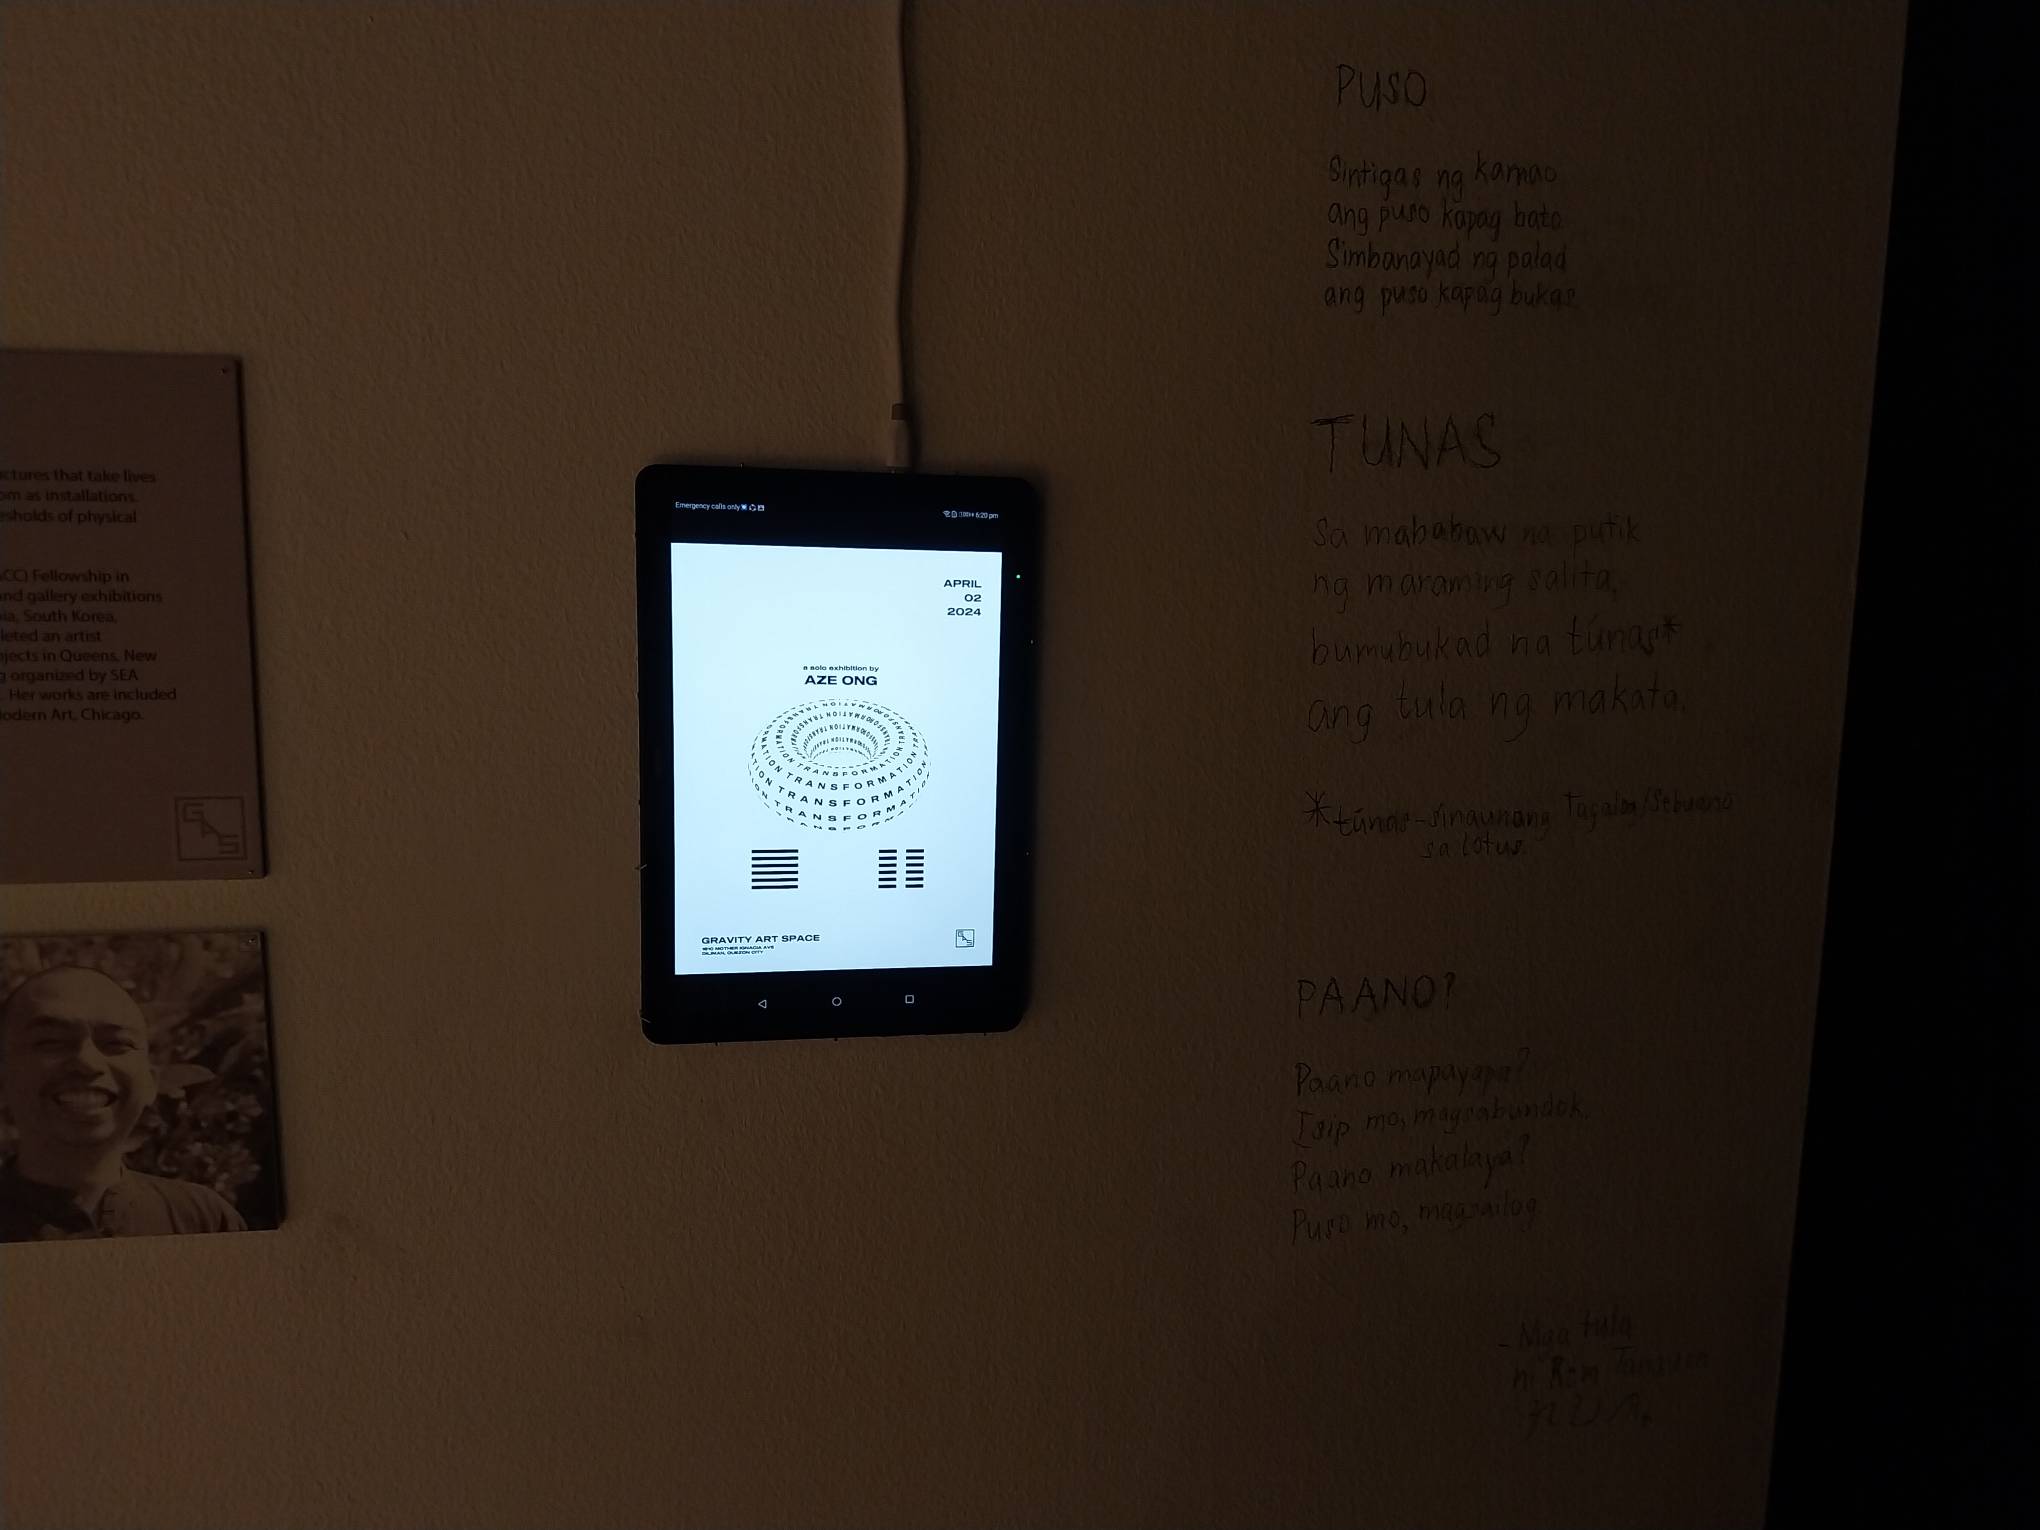 The tablet on the wall playing Ryan “Rem” Tanauan's poetry. Photo by Elle Yap.